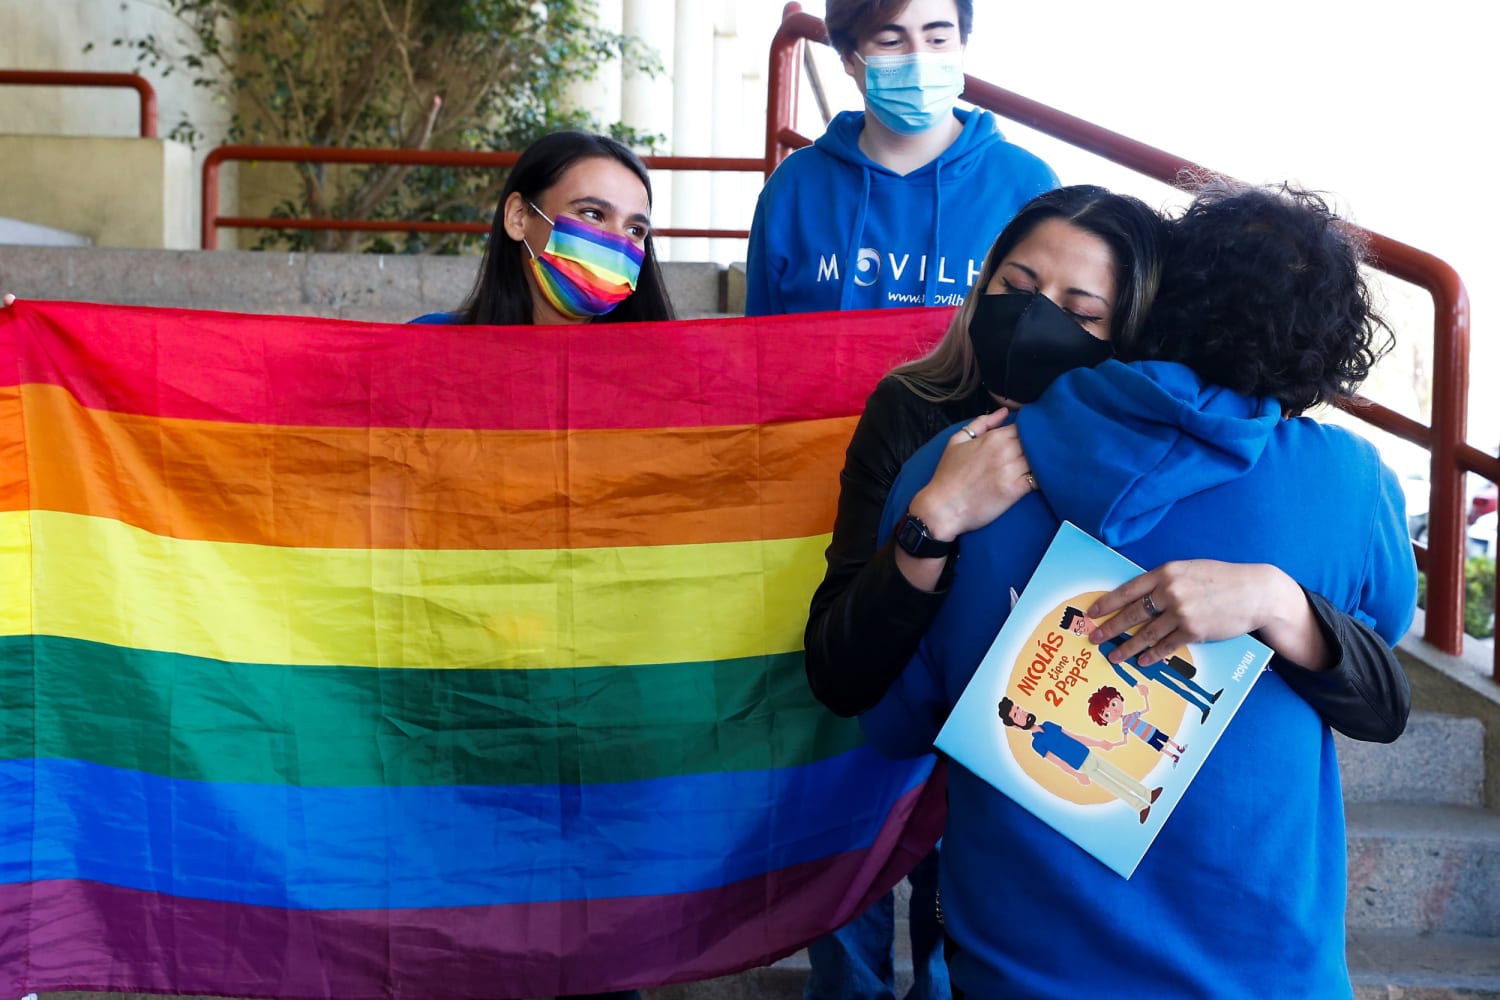 Chile legalizes same-sex marriage in historic vote